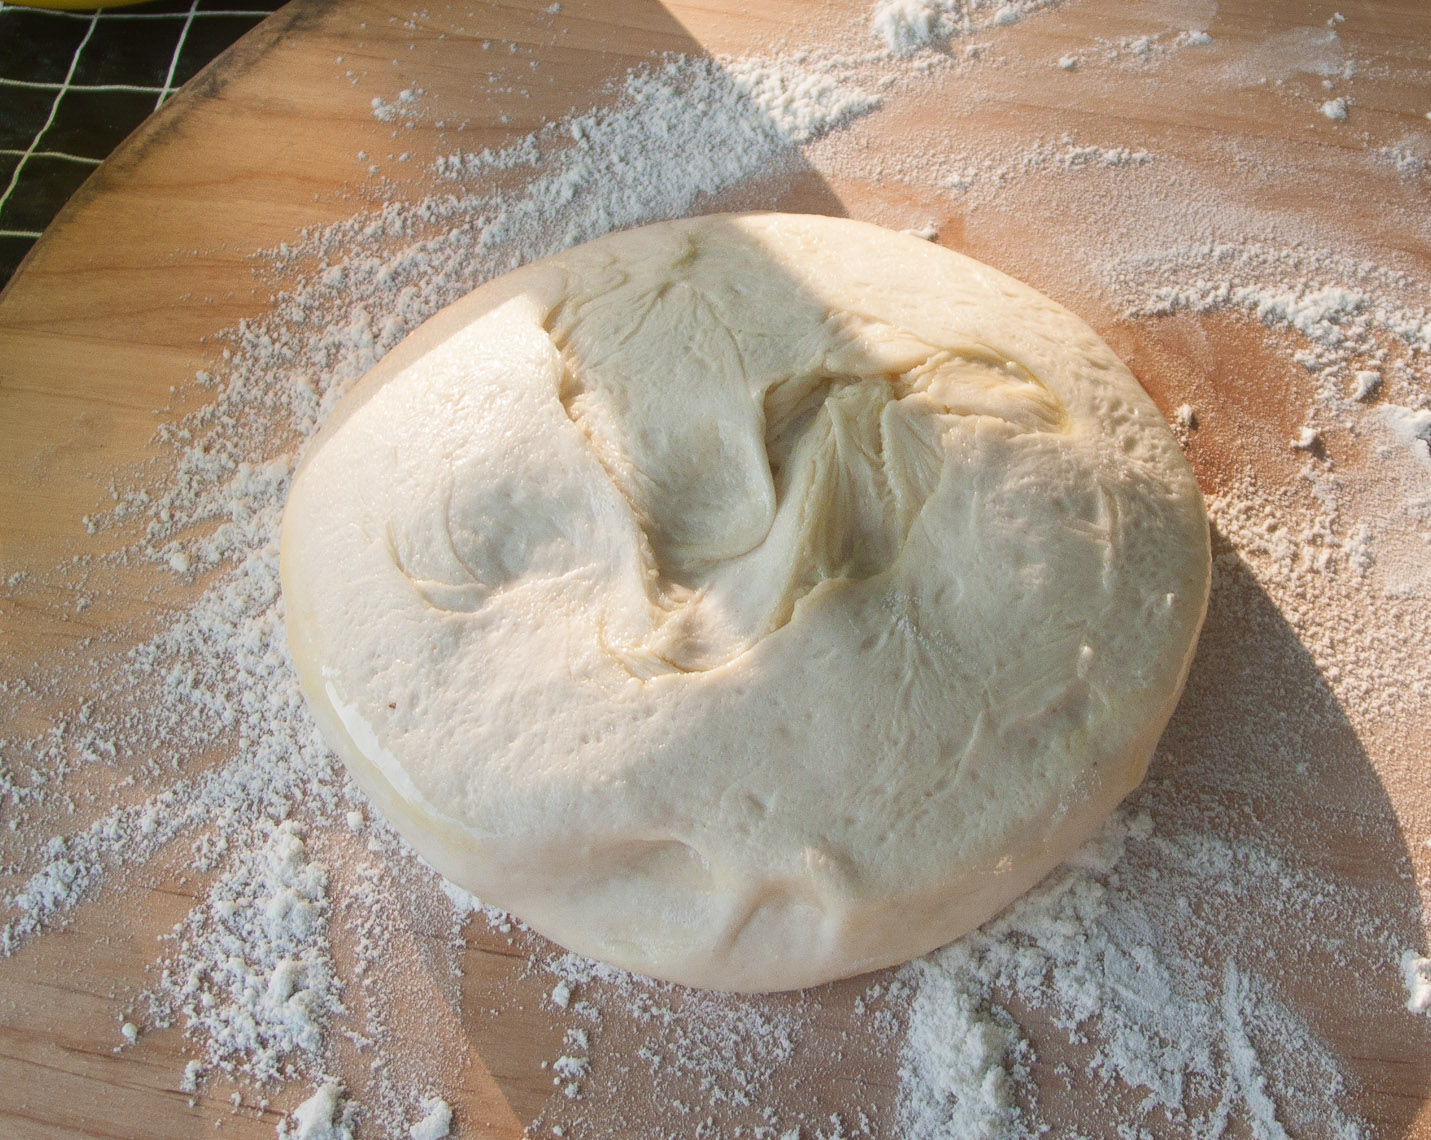 pizza dough ready for stretching